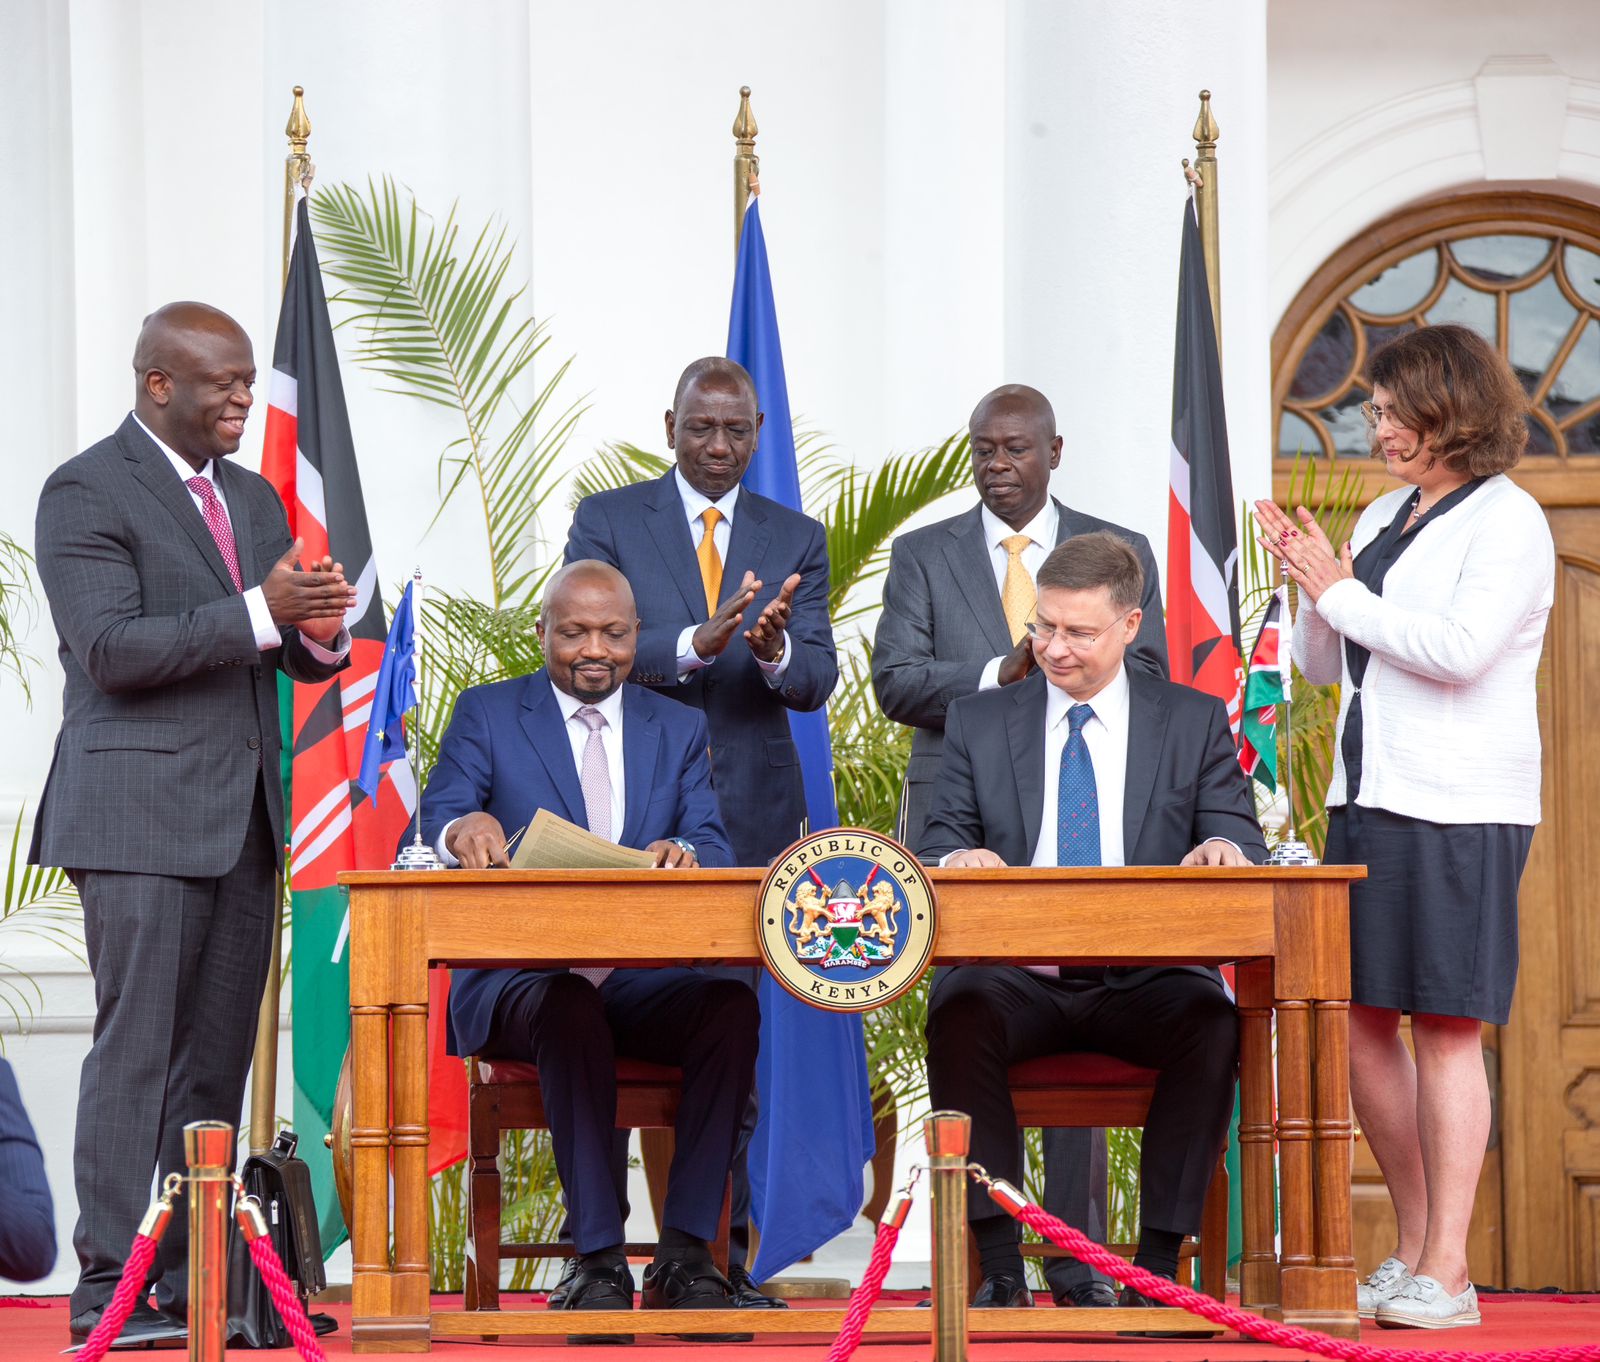 The signing of the European Partnership Agreement between EU and Kenya on Monday, June 19 at State House in Nairobi.